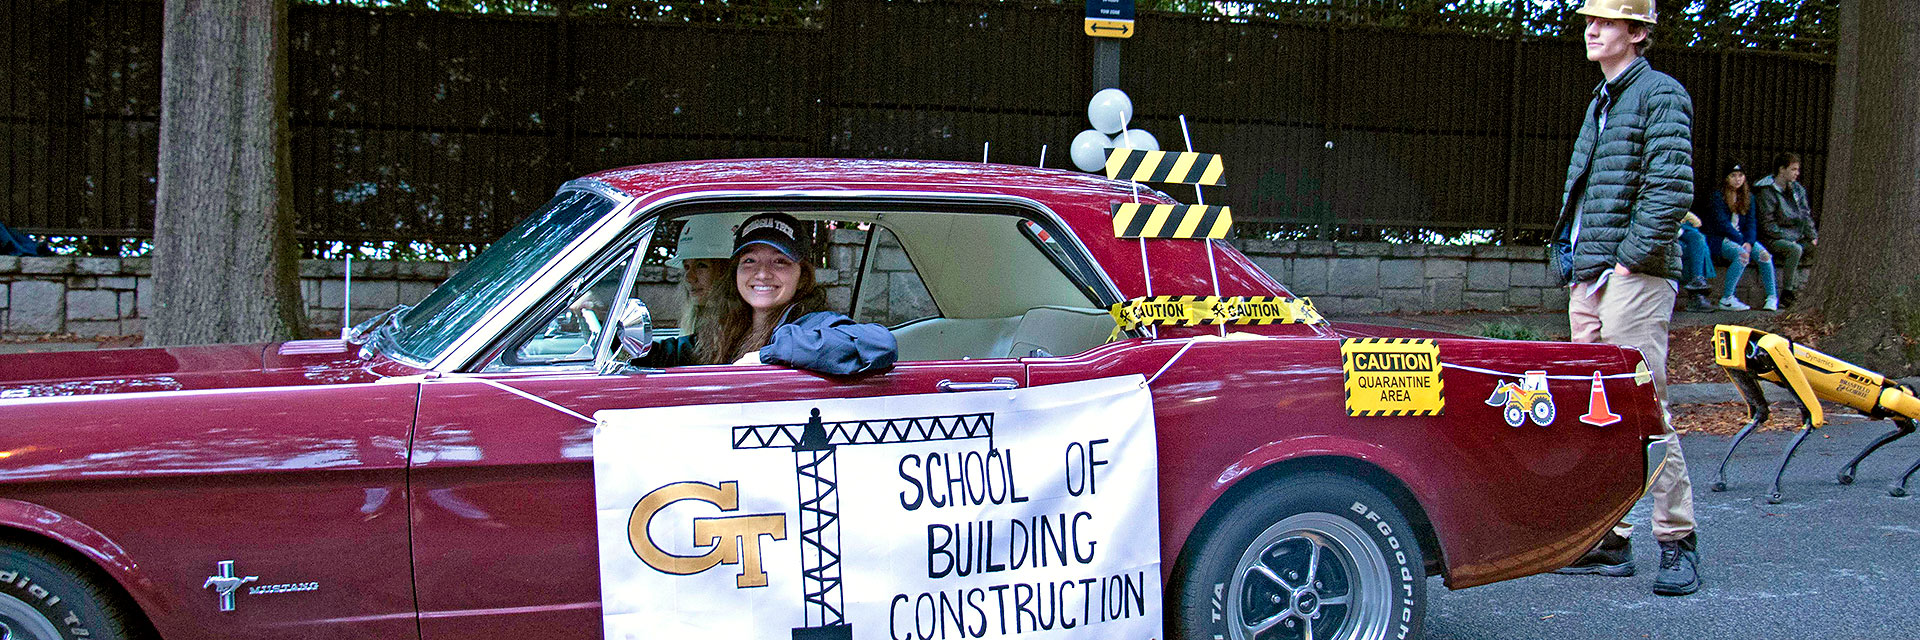 A student drives a Ford mustang in the Wreck Parade followed by a SPOT robot.